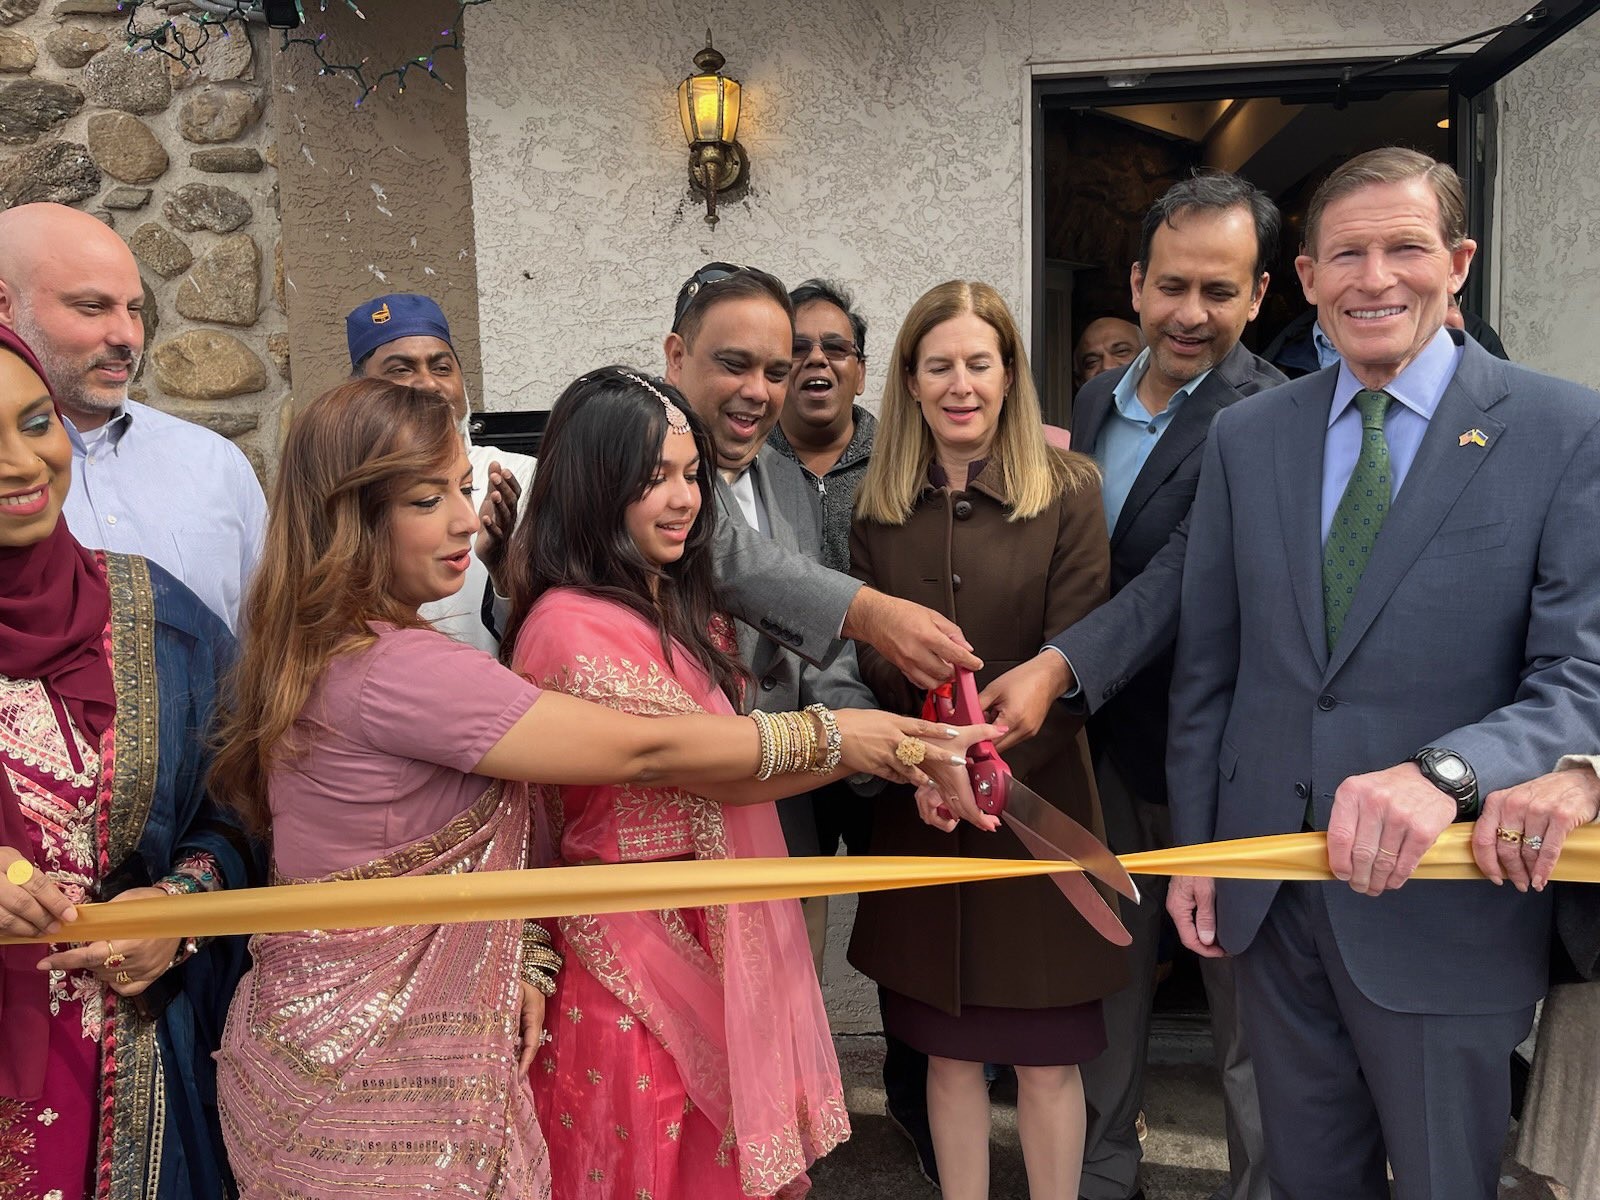 Blumenthal attended the ribbon cutting for the Royal Tabaq Restaurant & banquet Hall in Meriden.